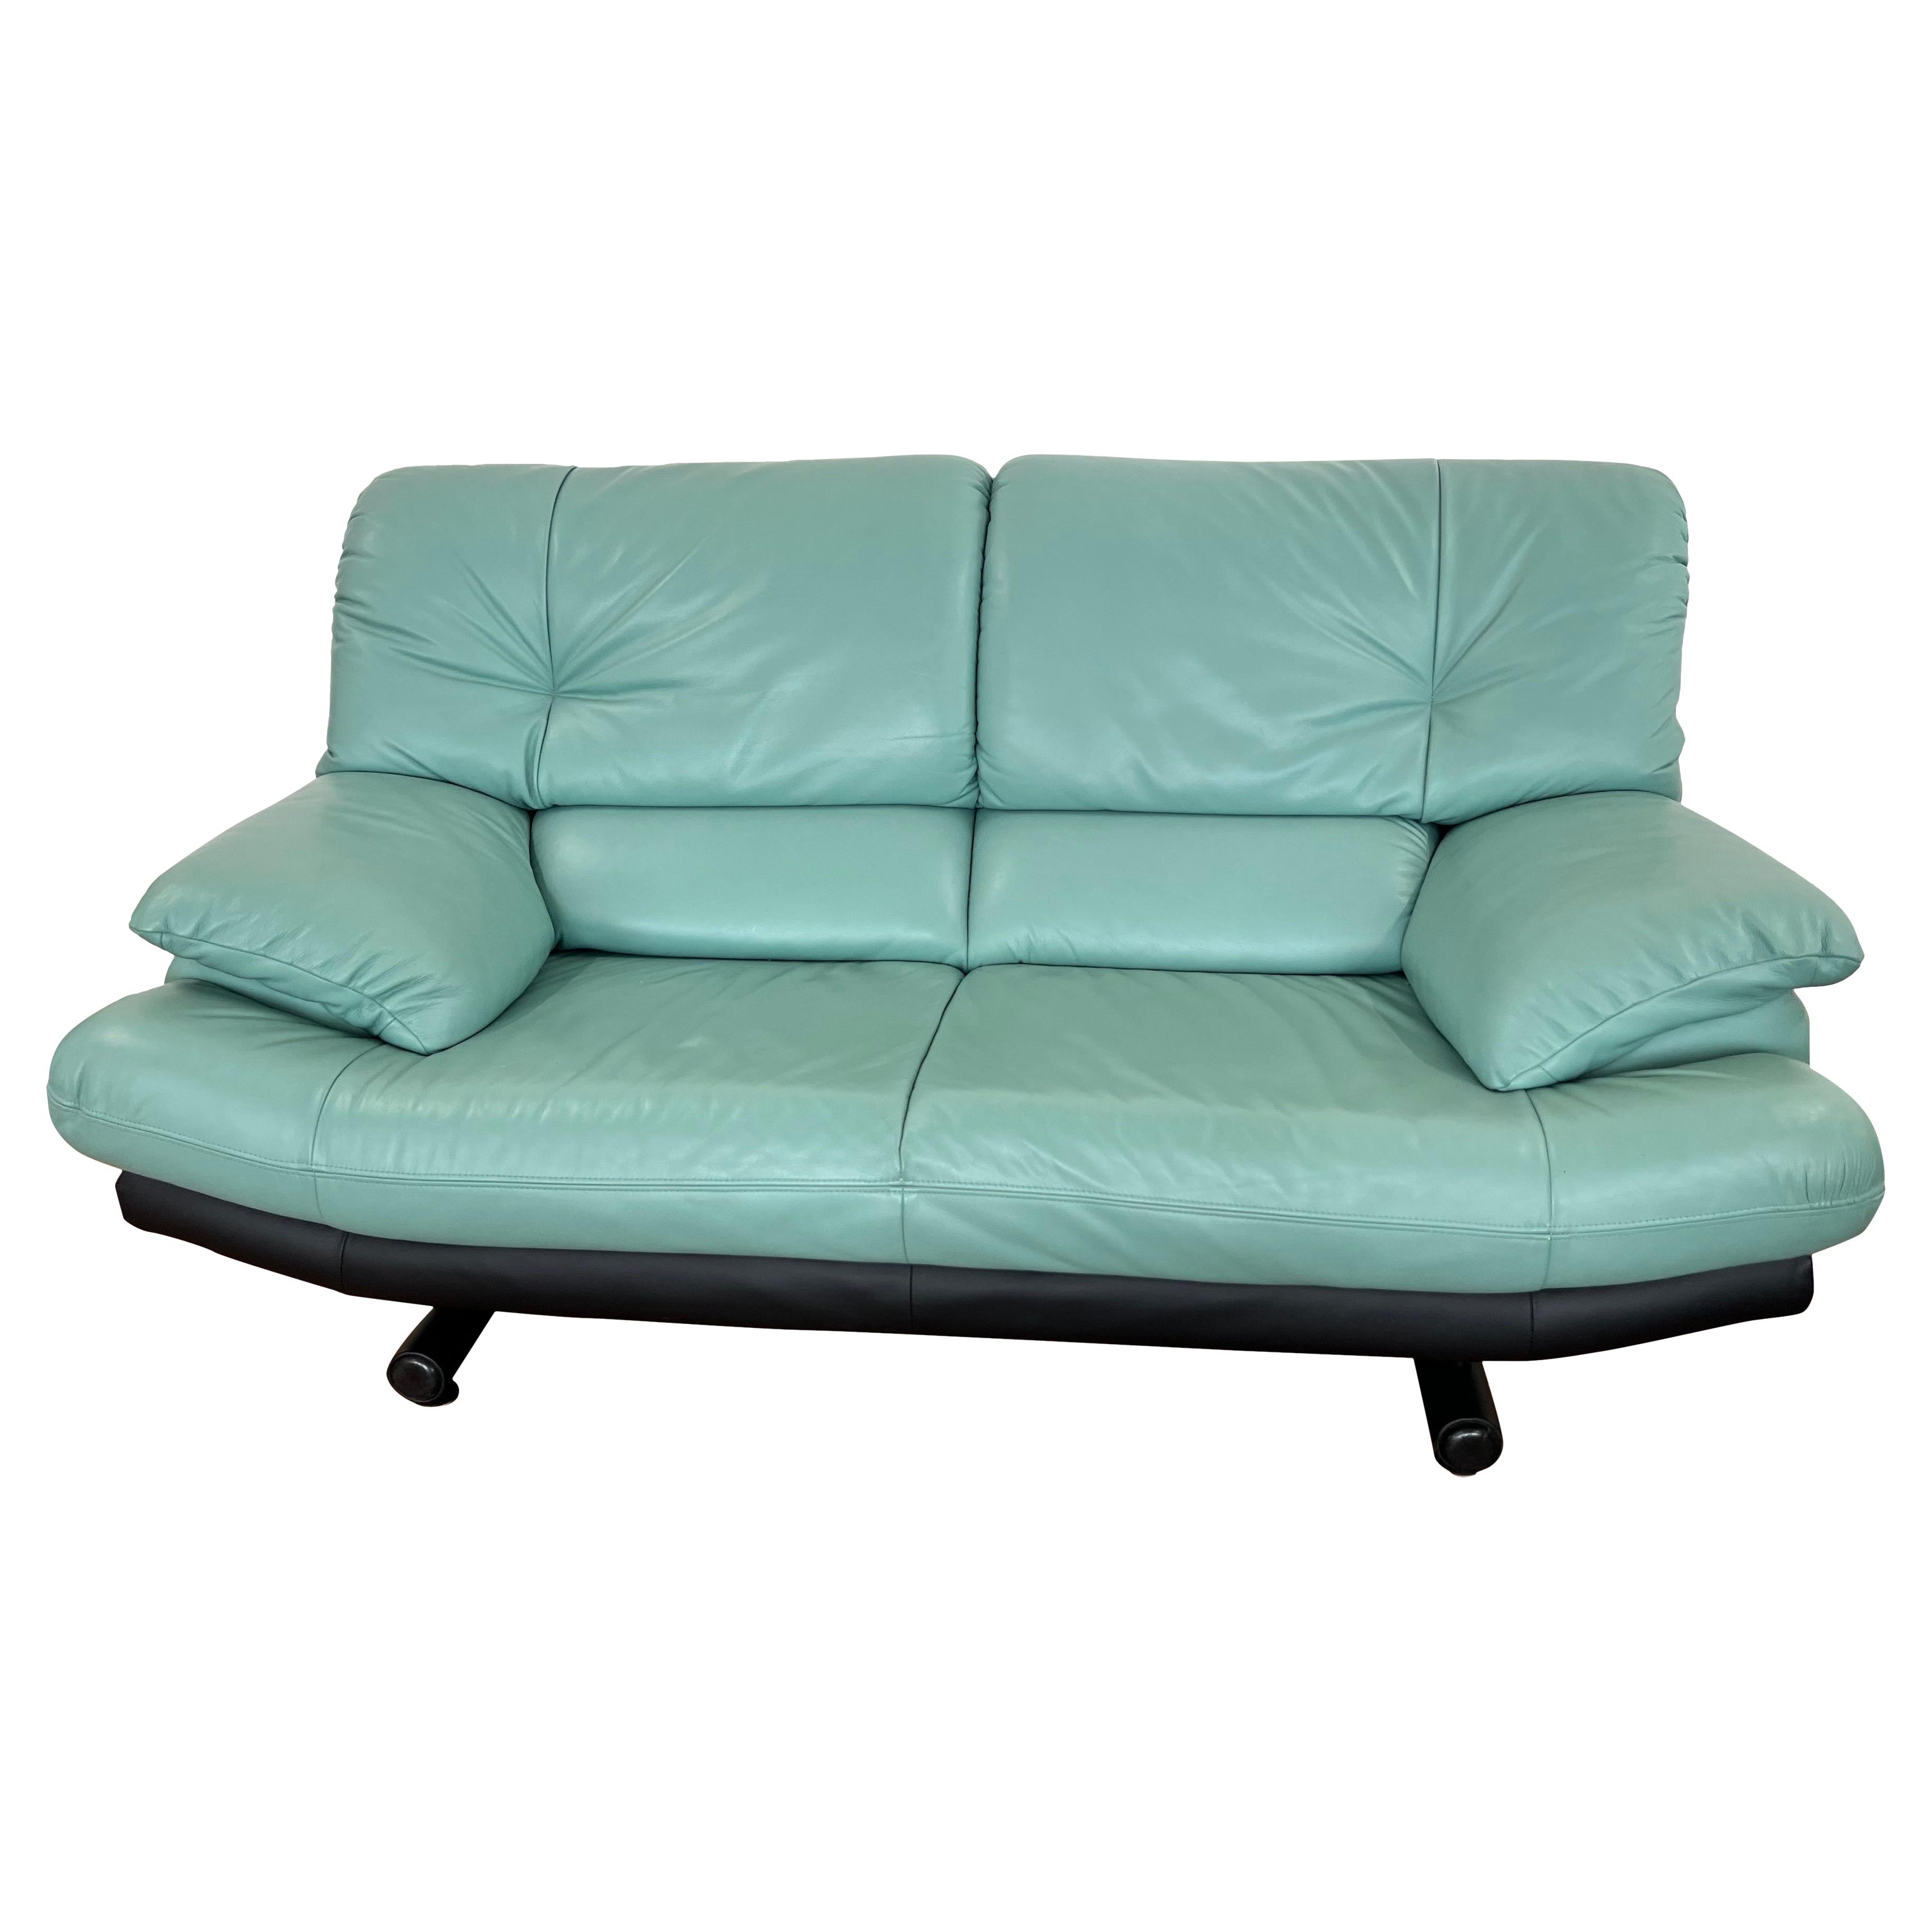 1980 Turquoise Leather Loveseat Natuzzi style, made in Italy